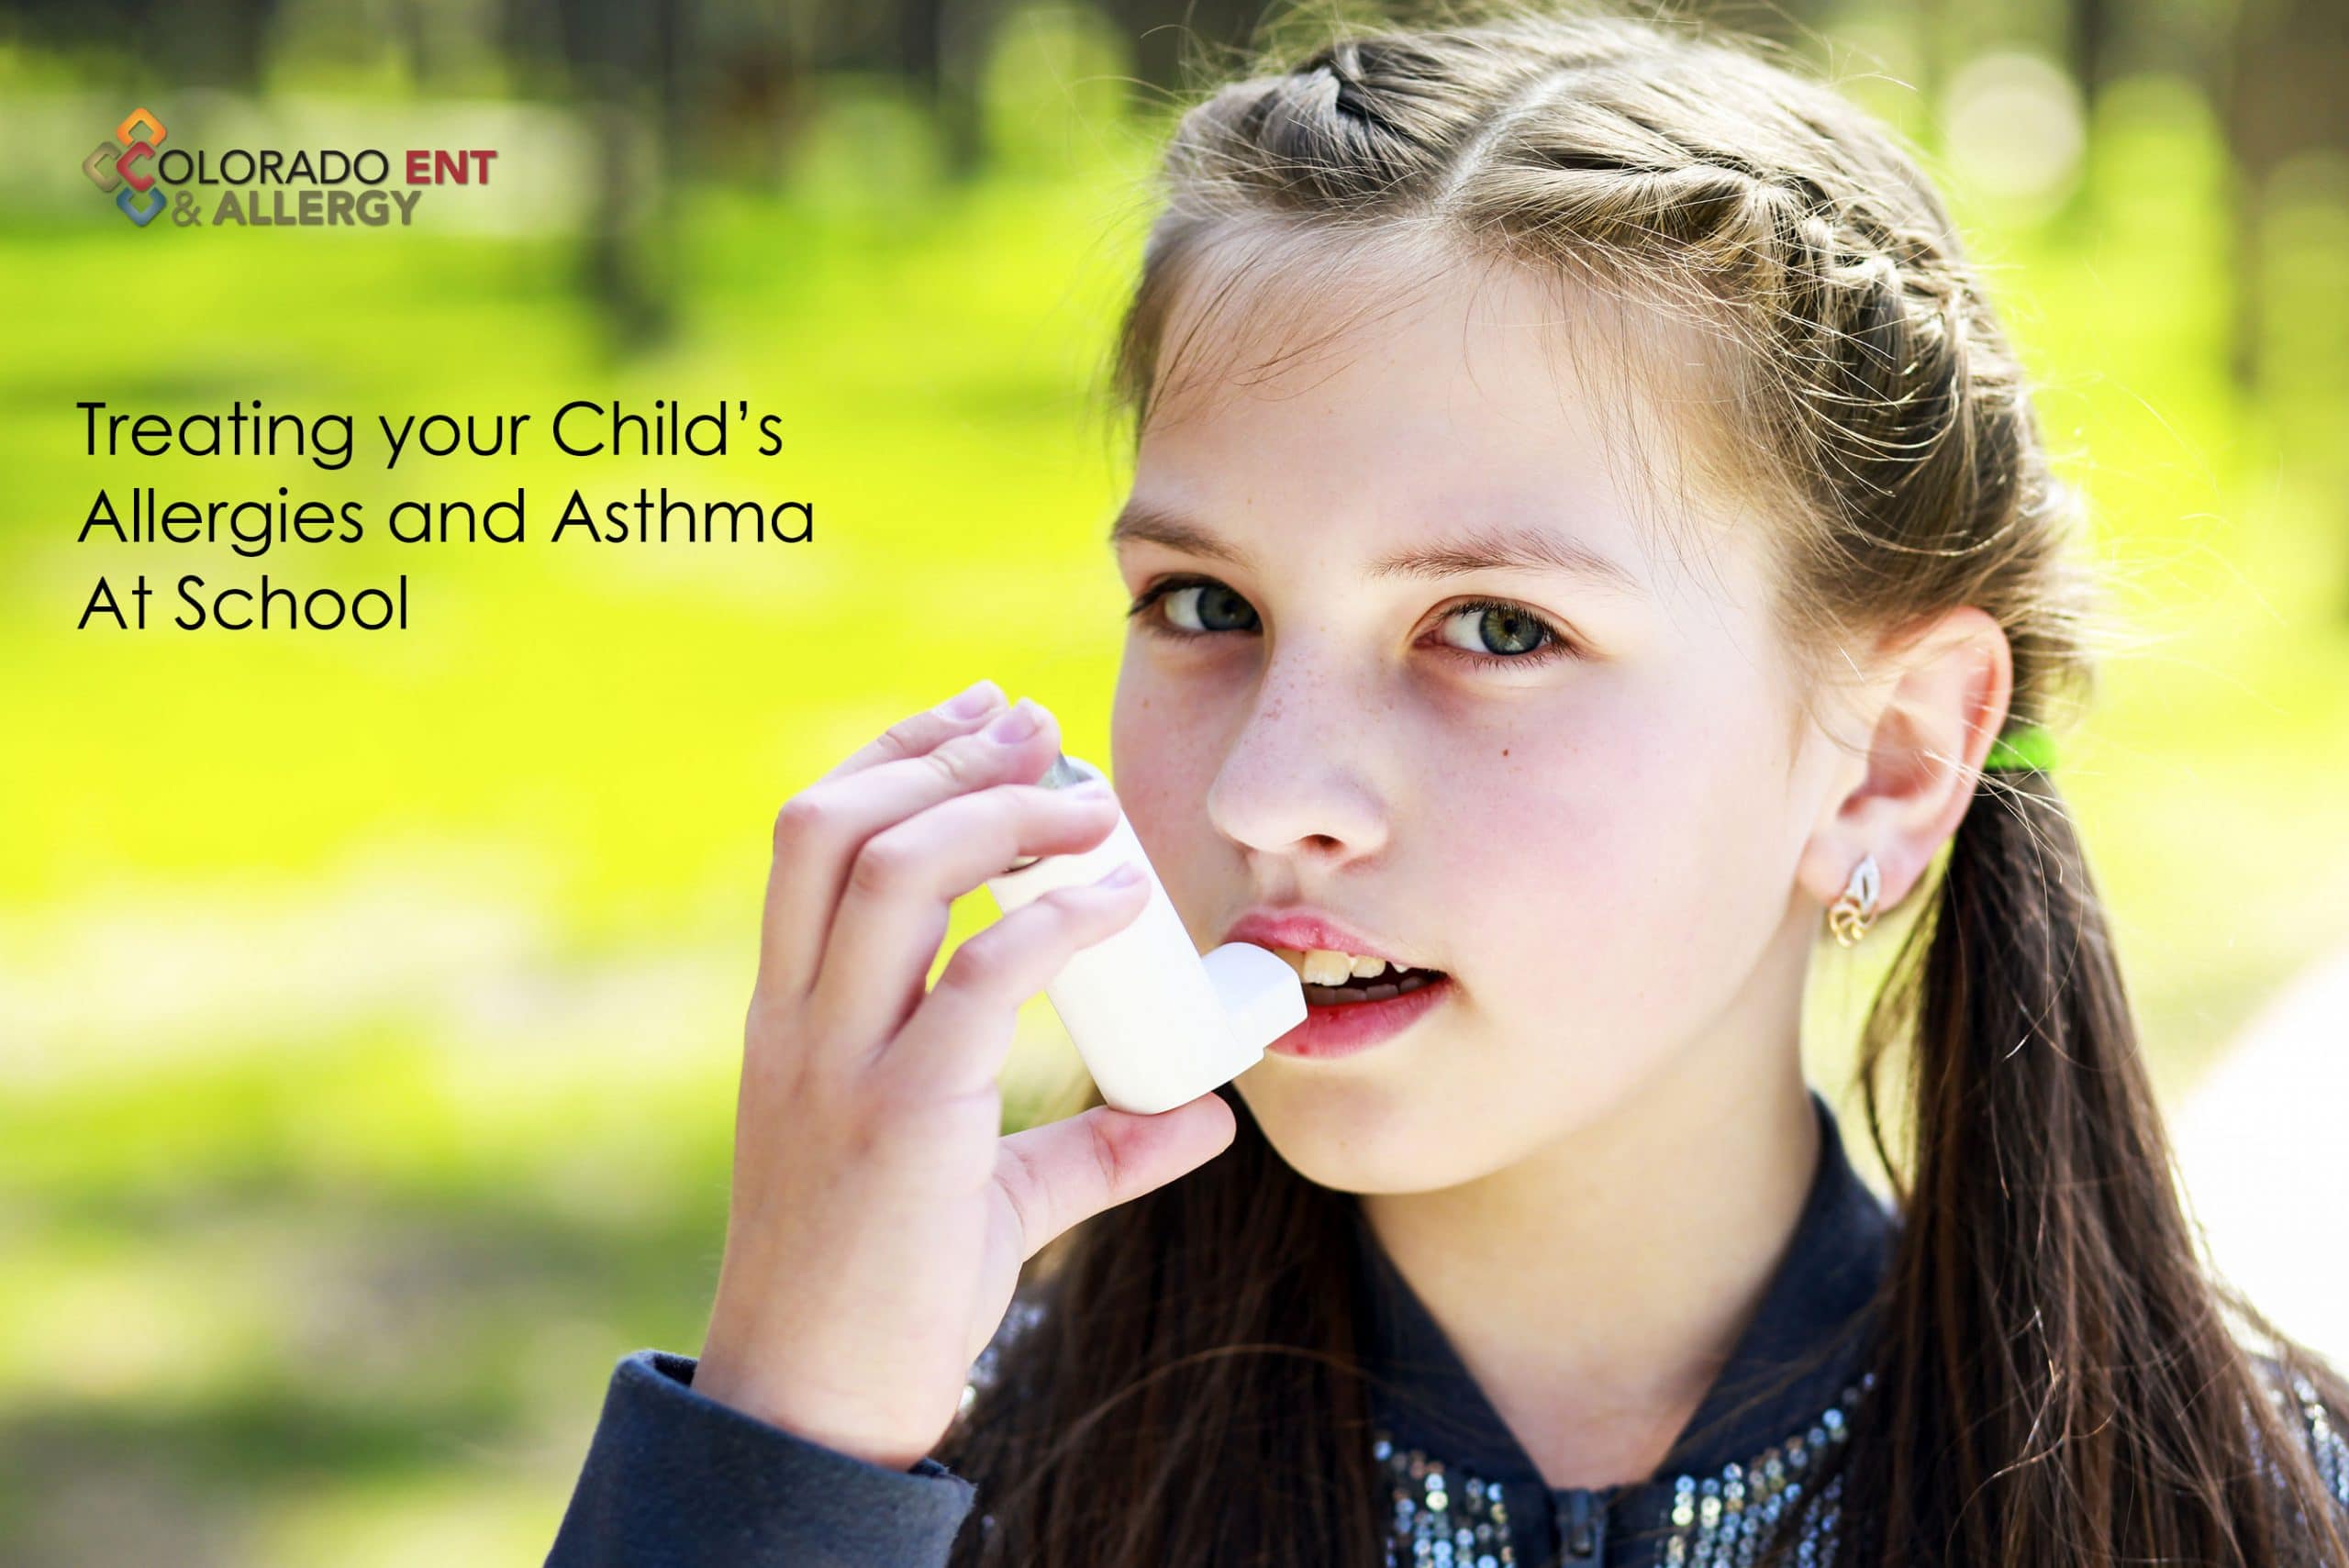 Treating Your Childs Allergies and Asthma at School